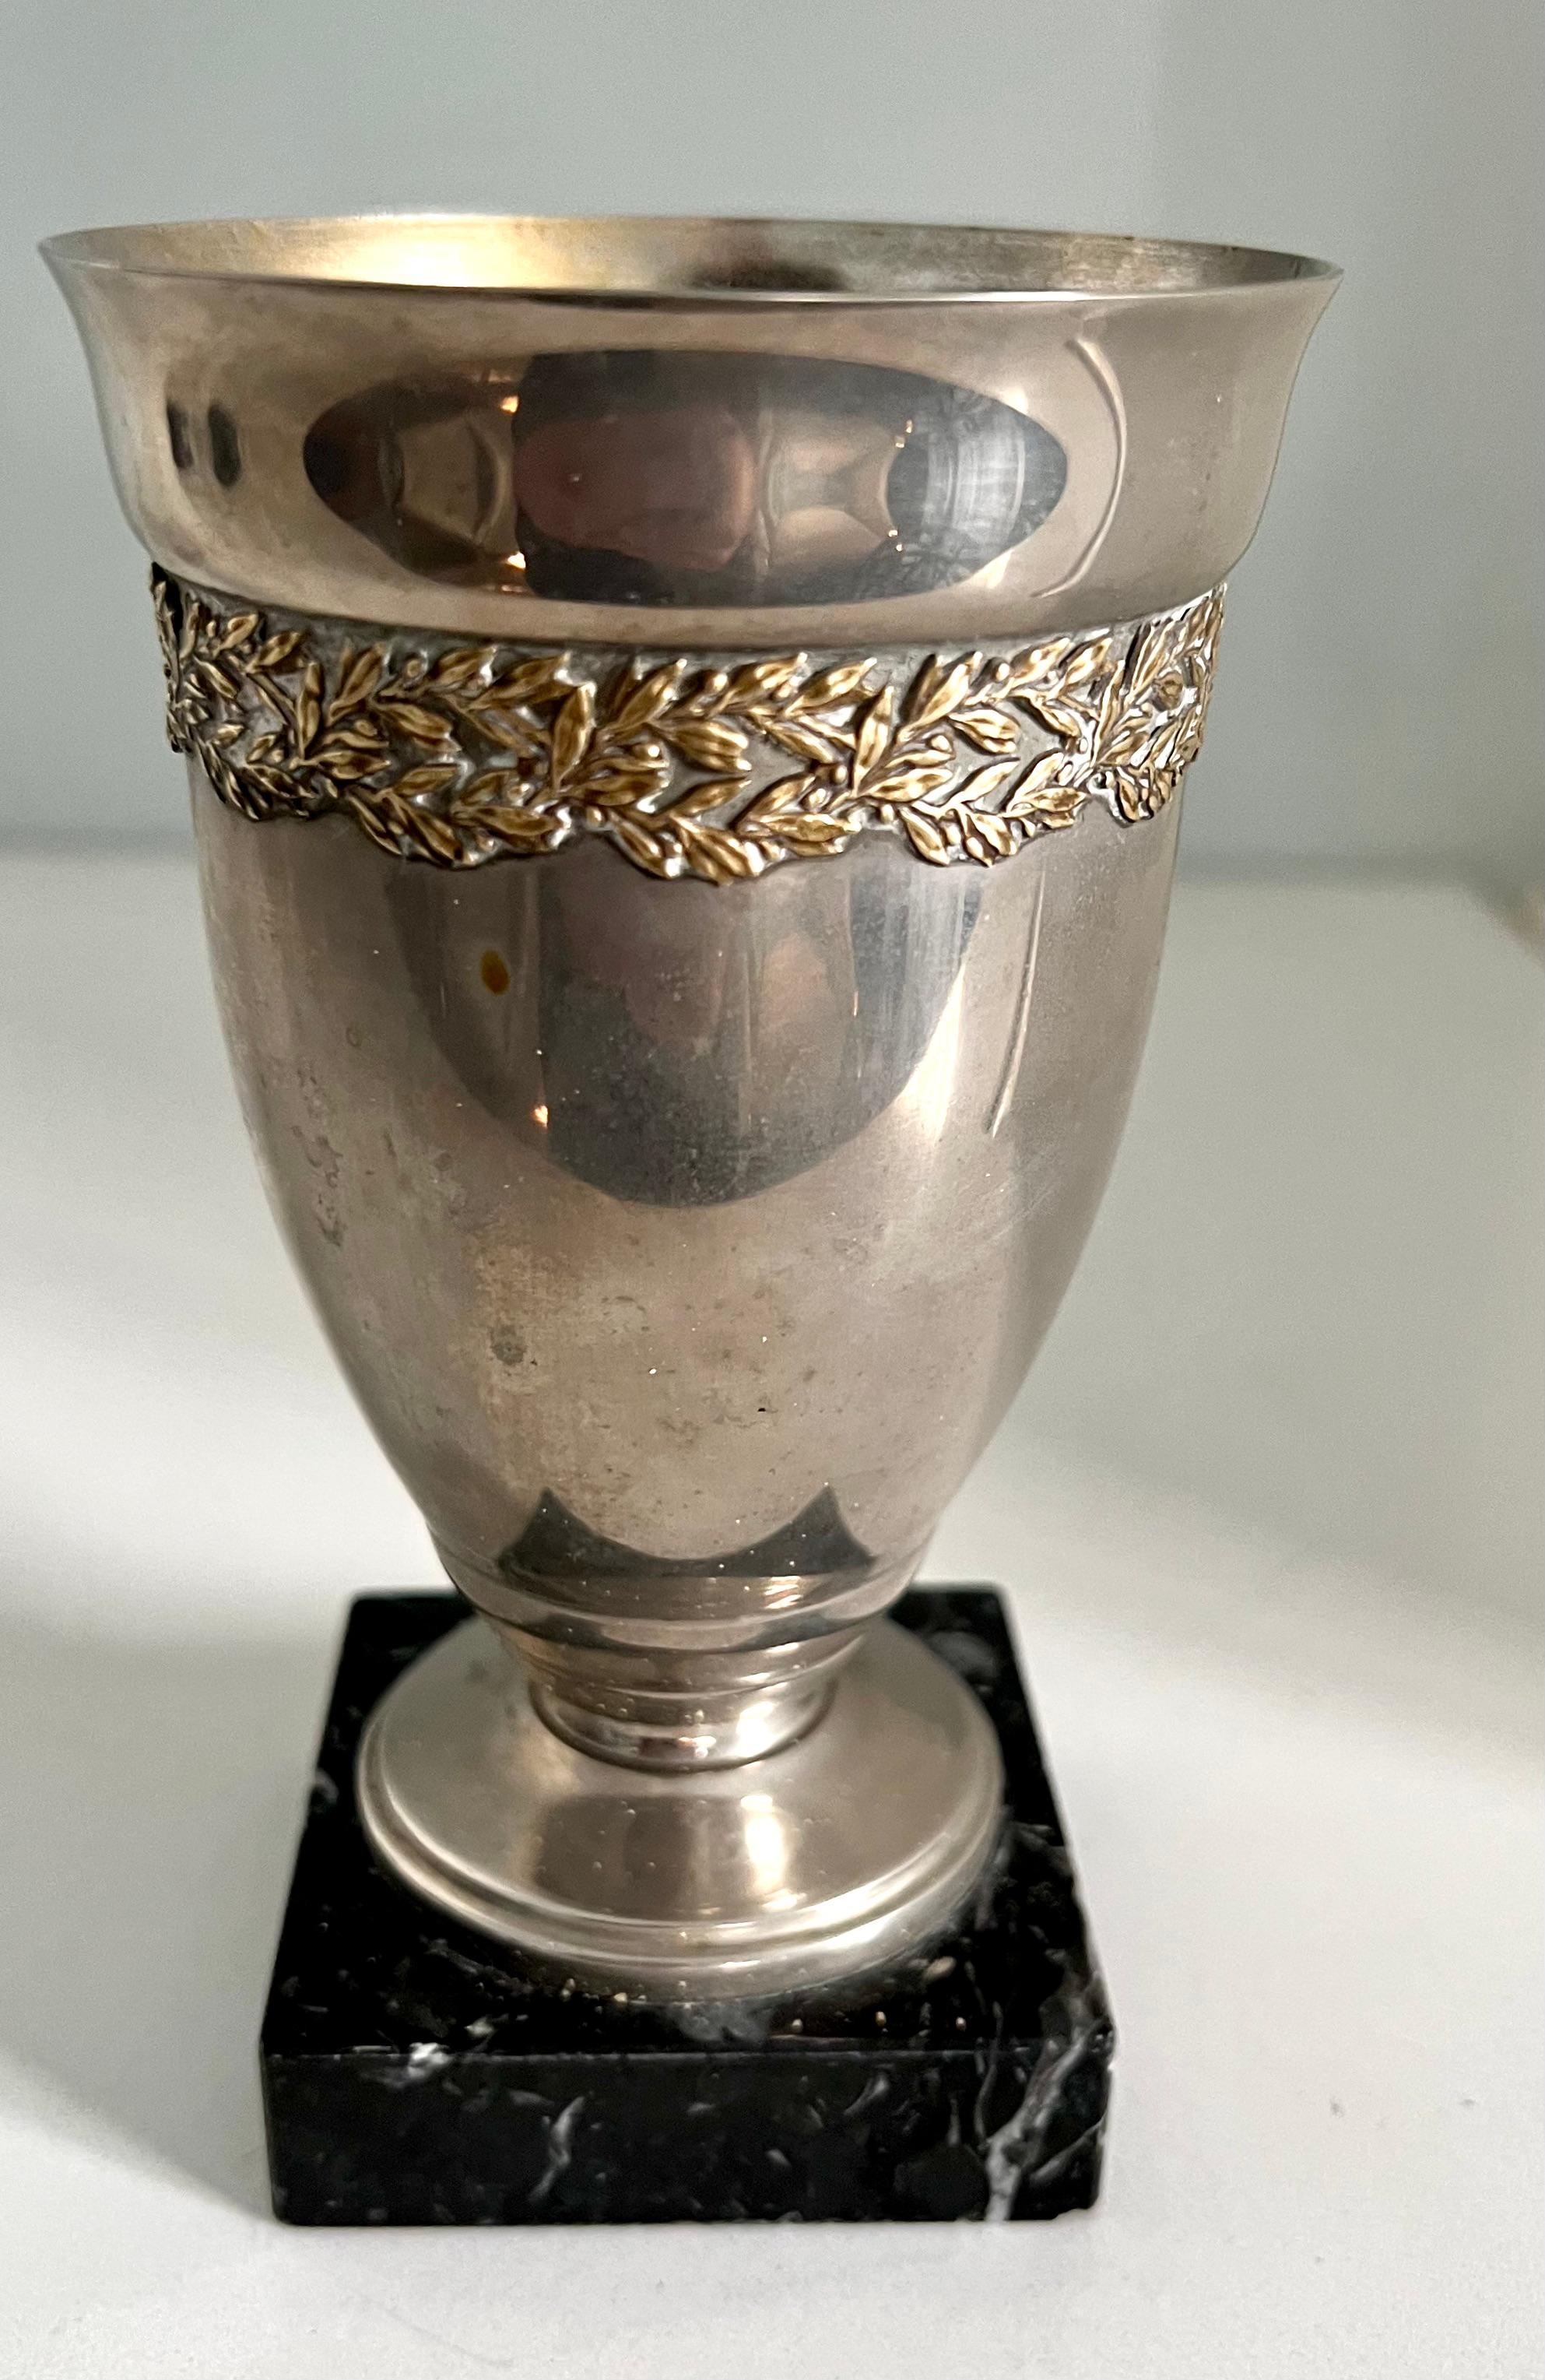 A wonderful Silver cup with a brass band detail on a marble or granite base. The cup, while perfectly suited for a small gathering of flowers or to store pencils on a desk, is actually a small trophy. While it isn't prominent, a small brass icon of